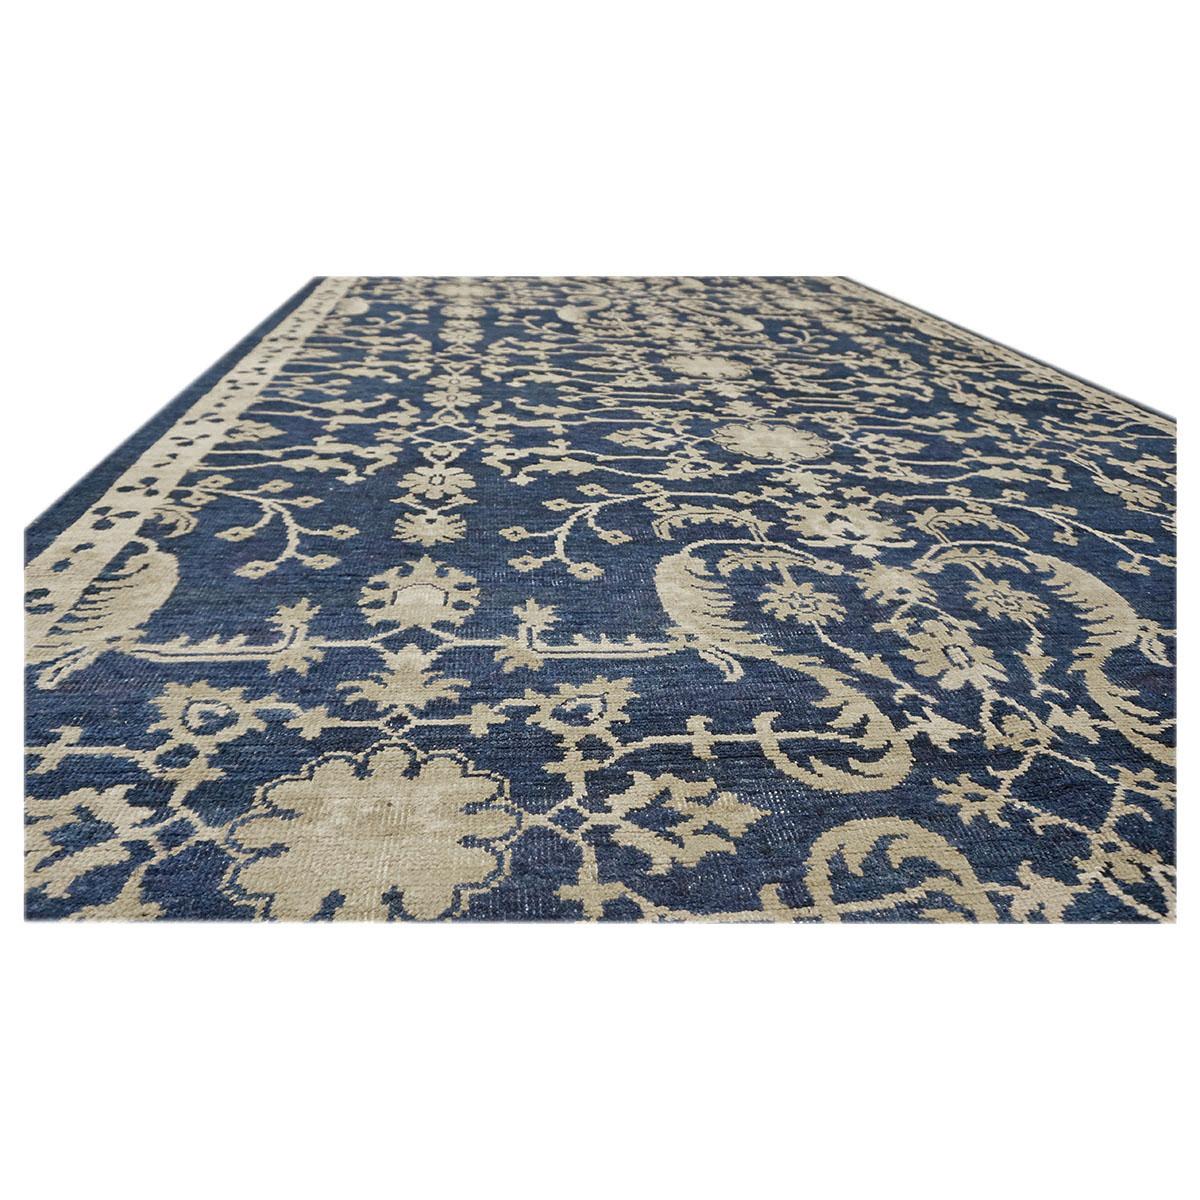 Afghan 21st Century Sultanabad 6x10 Navy Blue & Ivory Handmade Area Rug For Sale